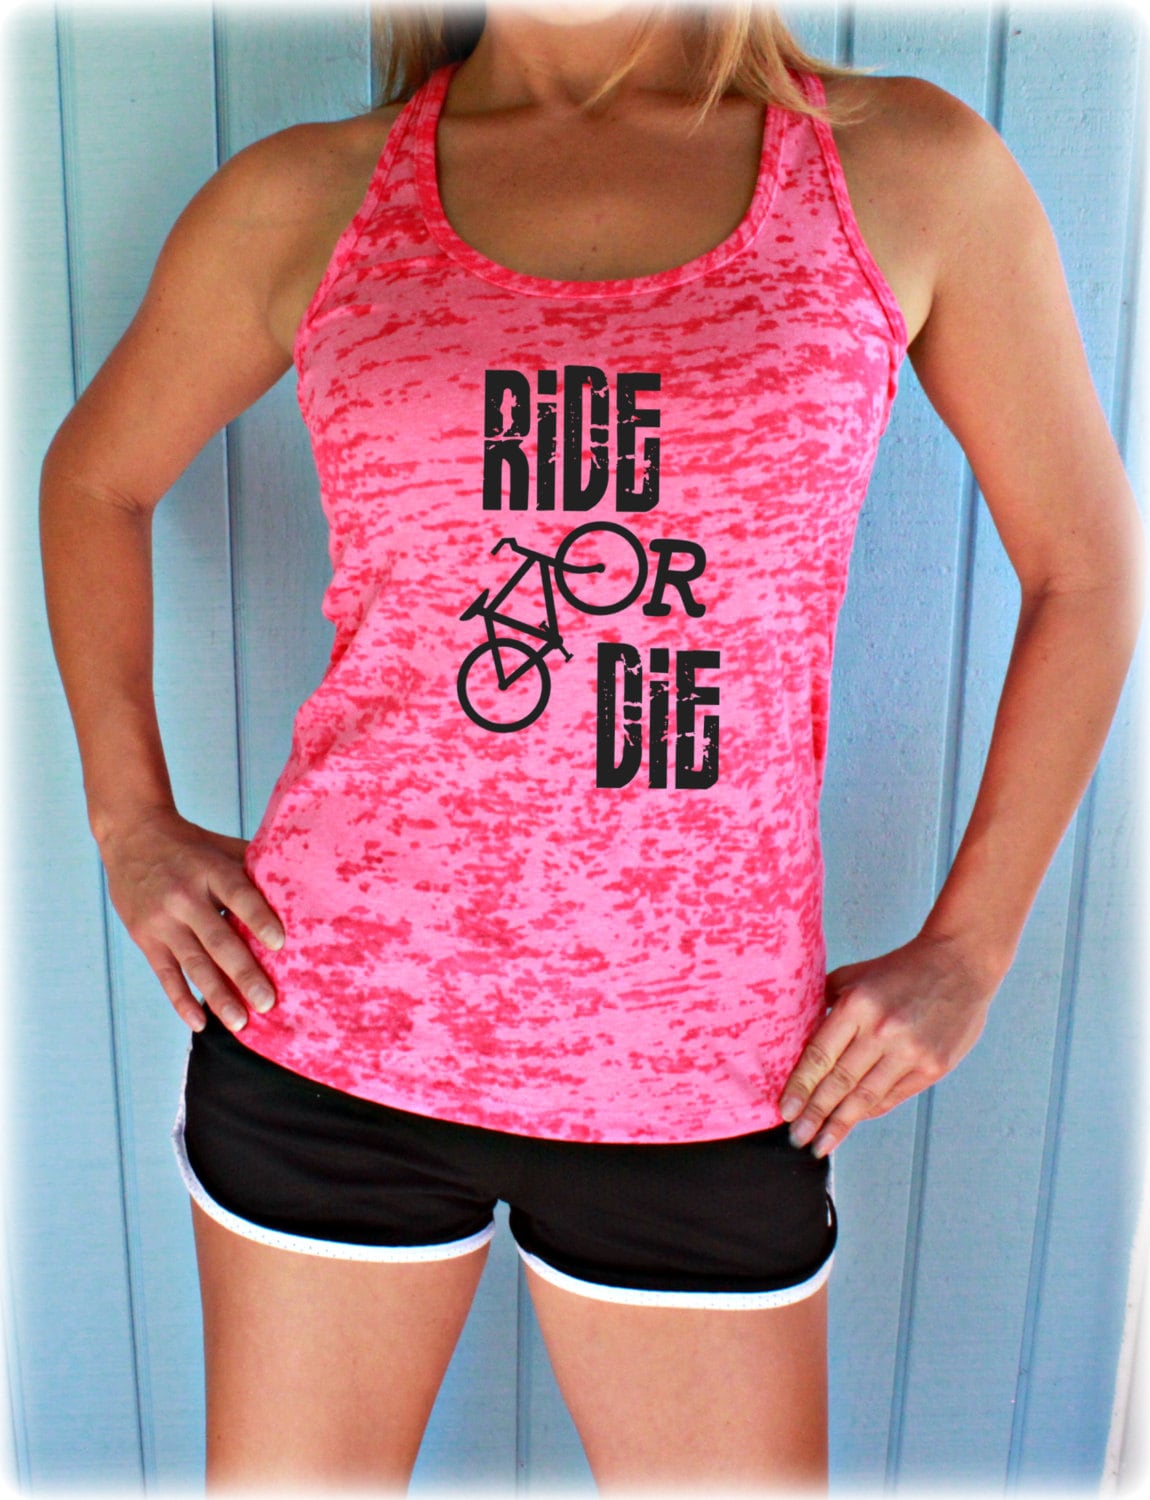 Download Ride or Die Workout Tank Top. Cute Womens Workout Clothing.